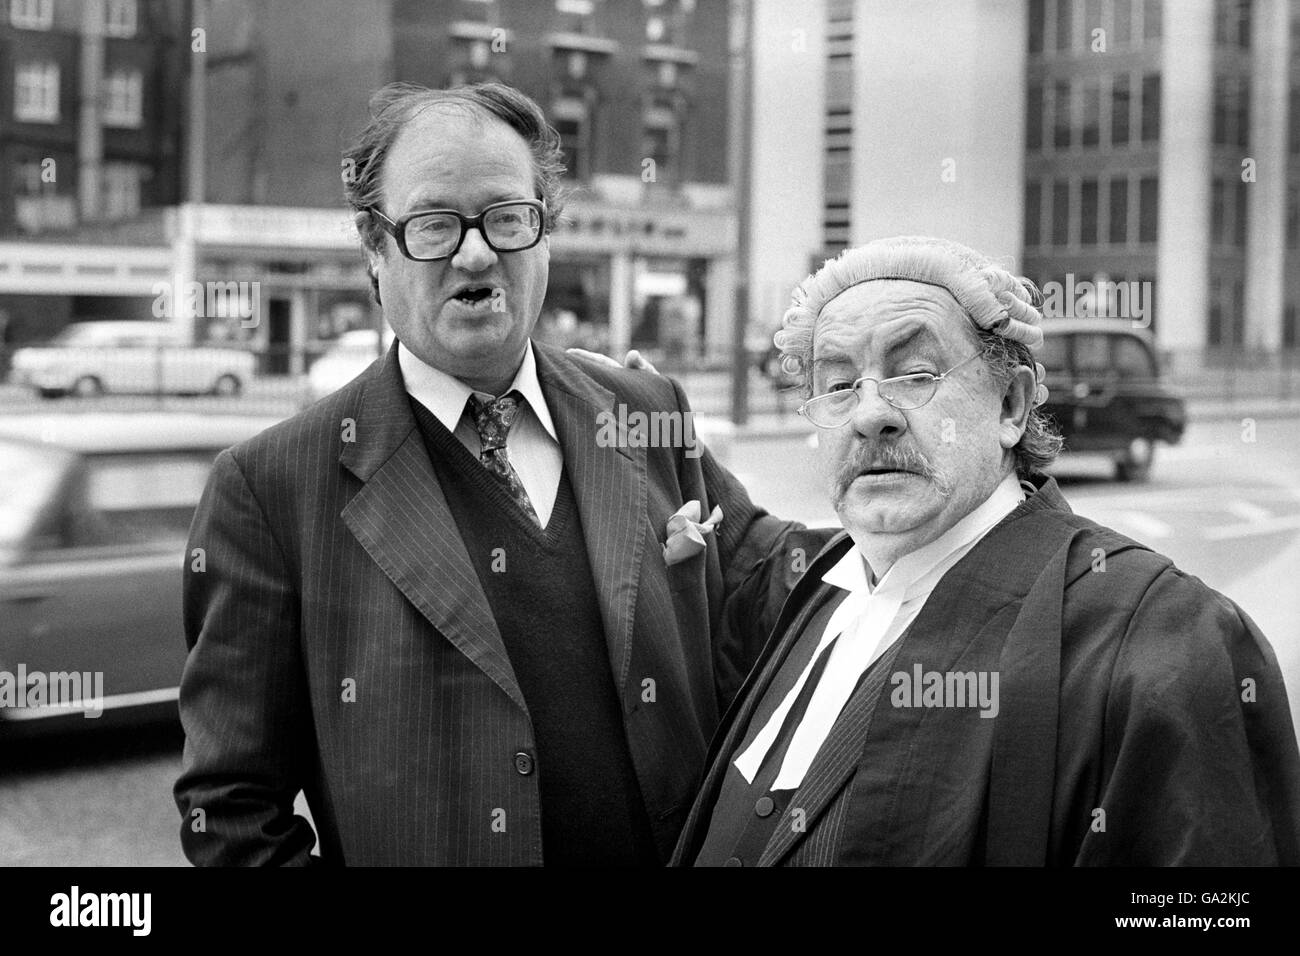 John Mortimer, the playwright Q.C., author of Thames TV's new six-part series, 'Rumpole of the Bailey', portrayed by actor Leo McKern (right) Stock Photo